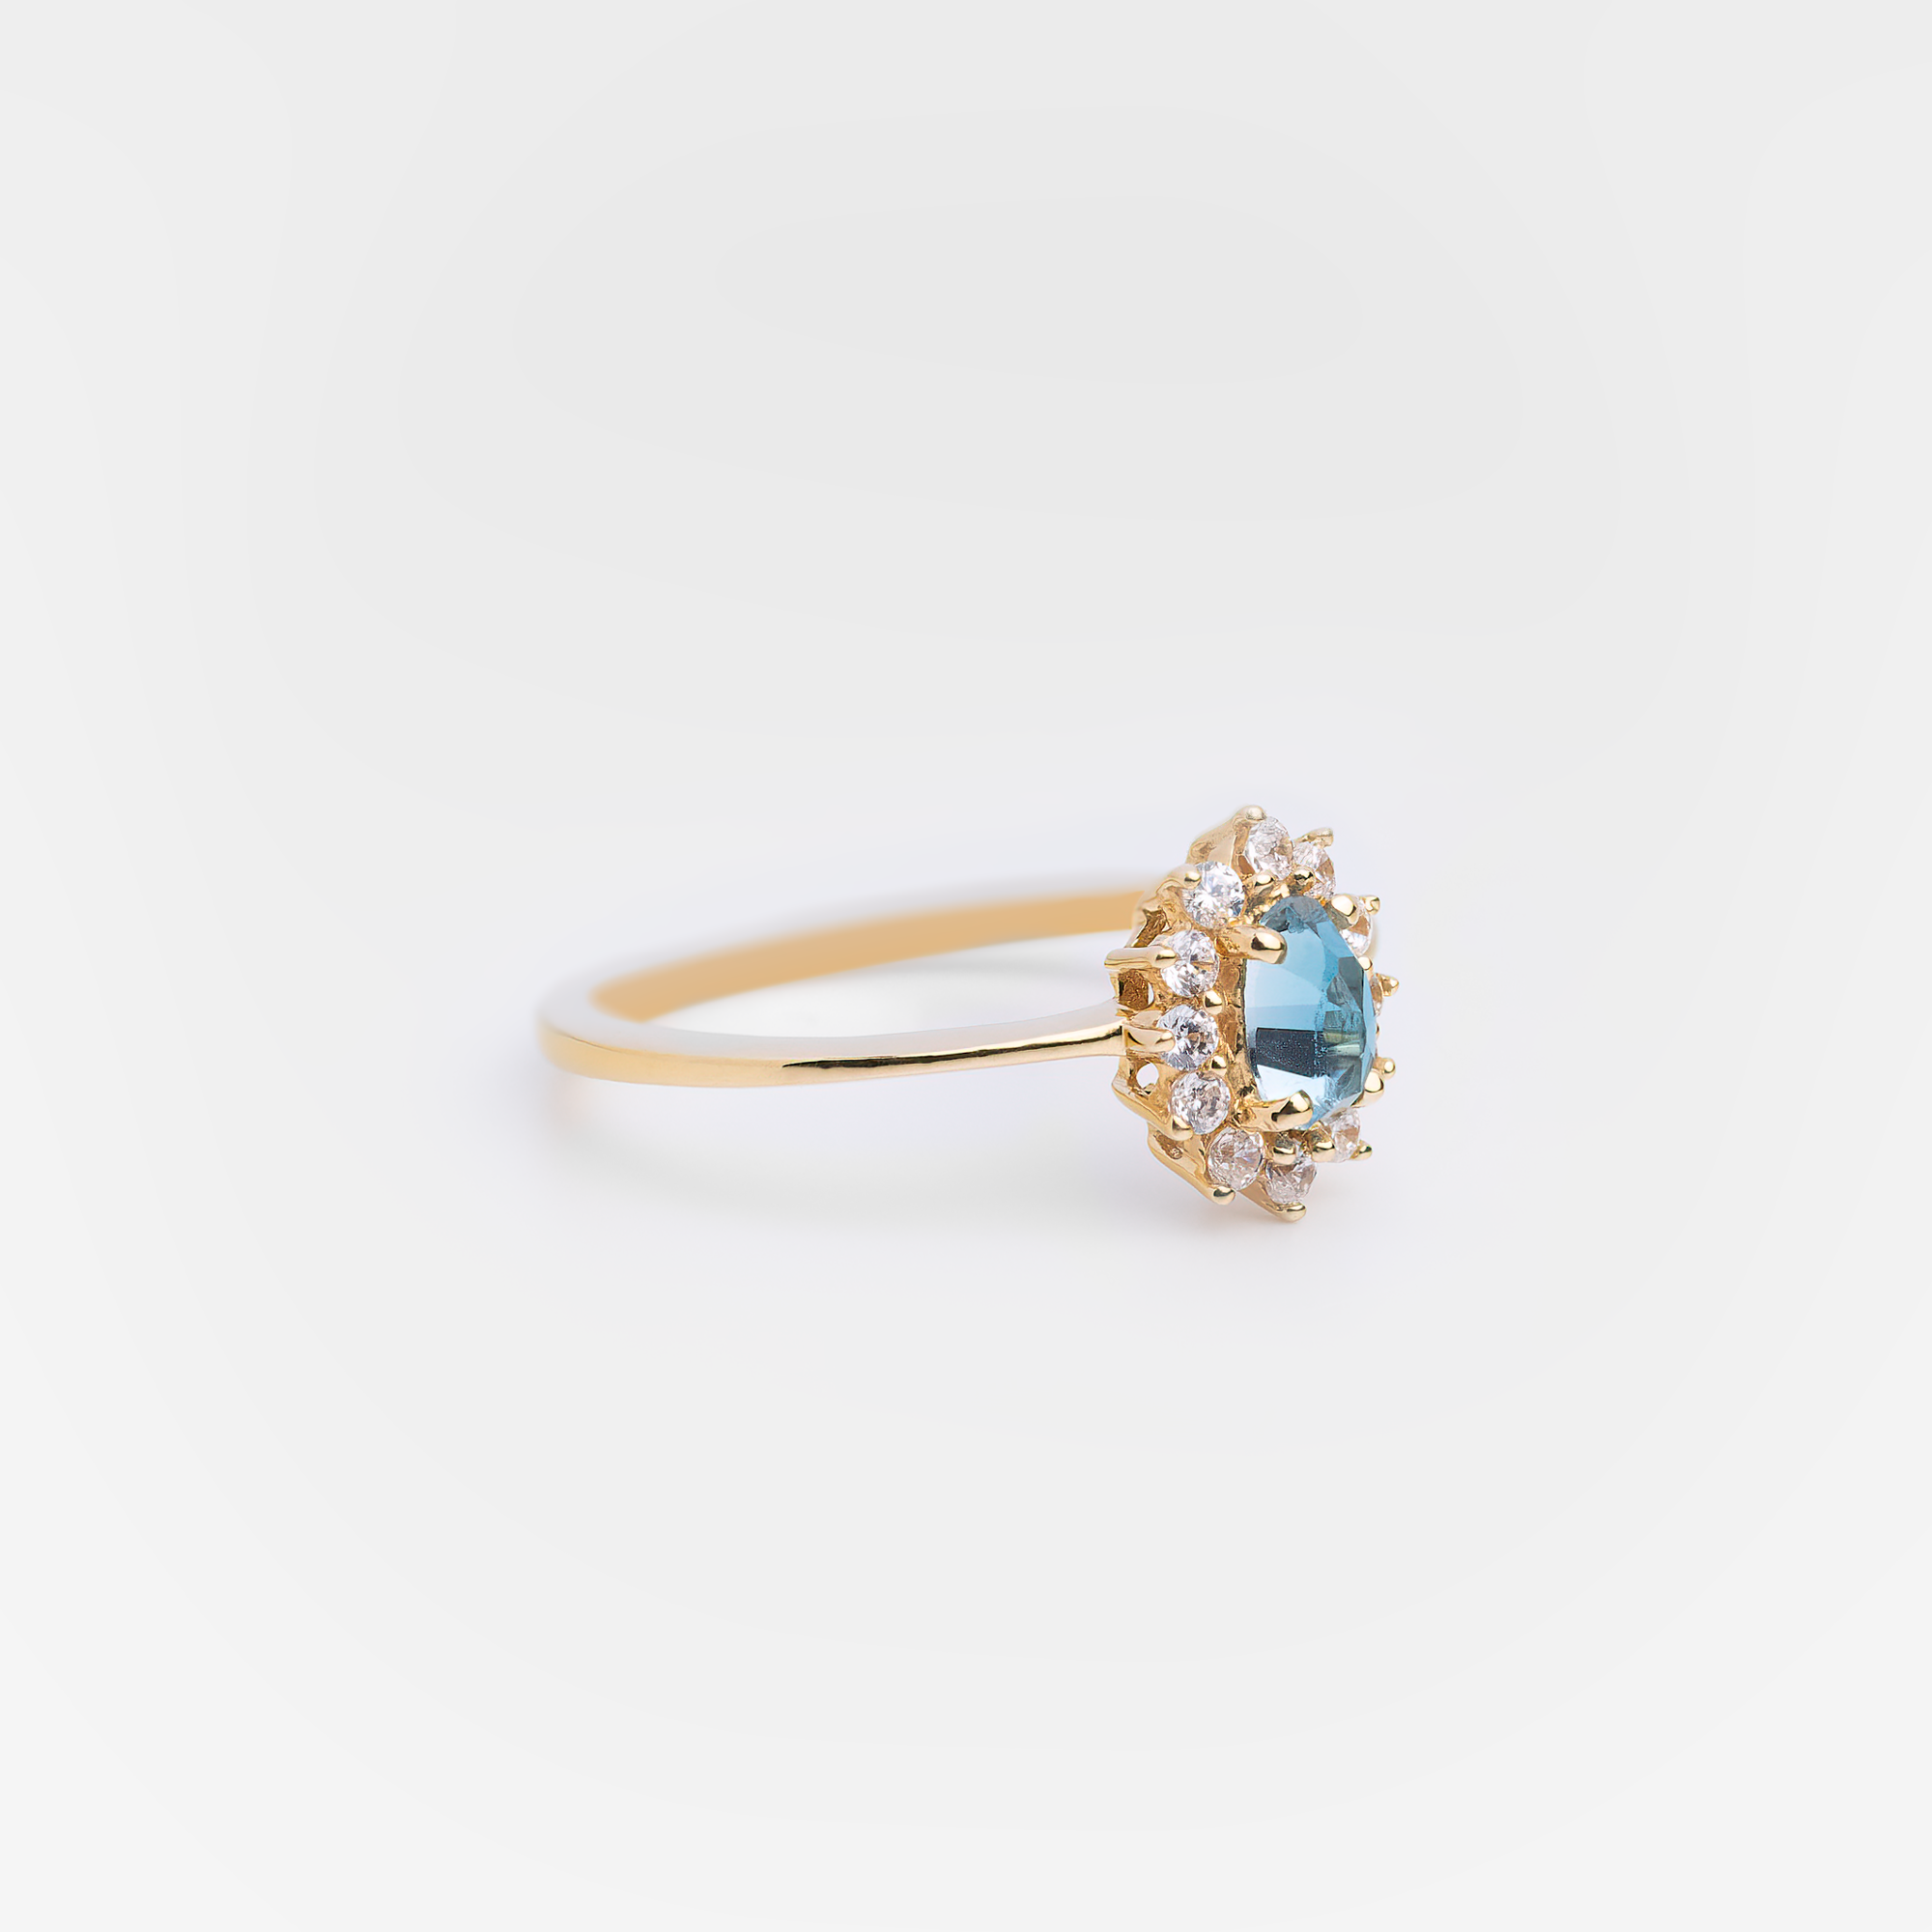 Luxembourg - 18K Gold Vermeil Blue Topaz Ring - Zafeer